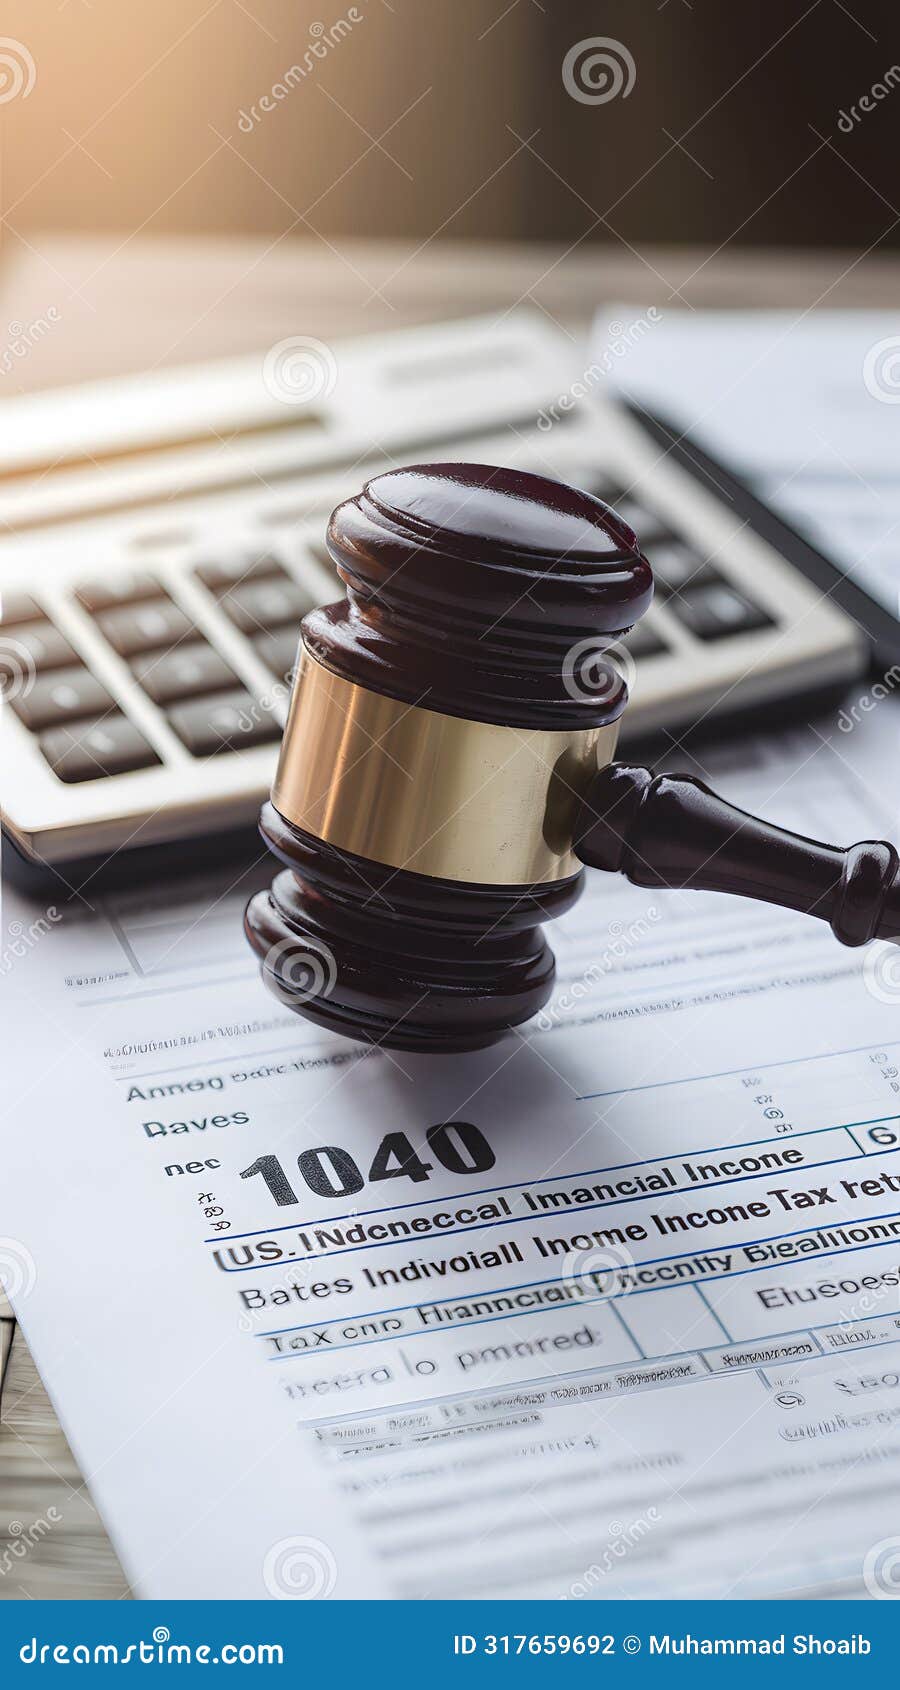 legal  gavel on tax form with calculator signifies financial implication and obligations.